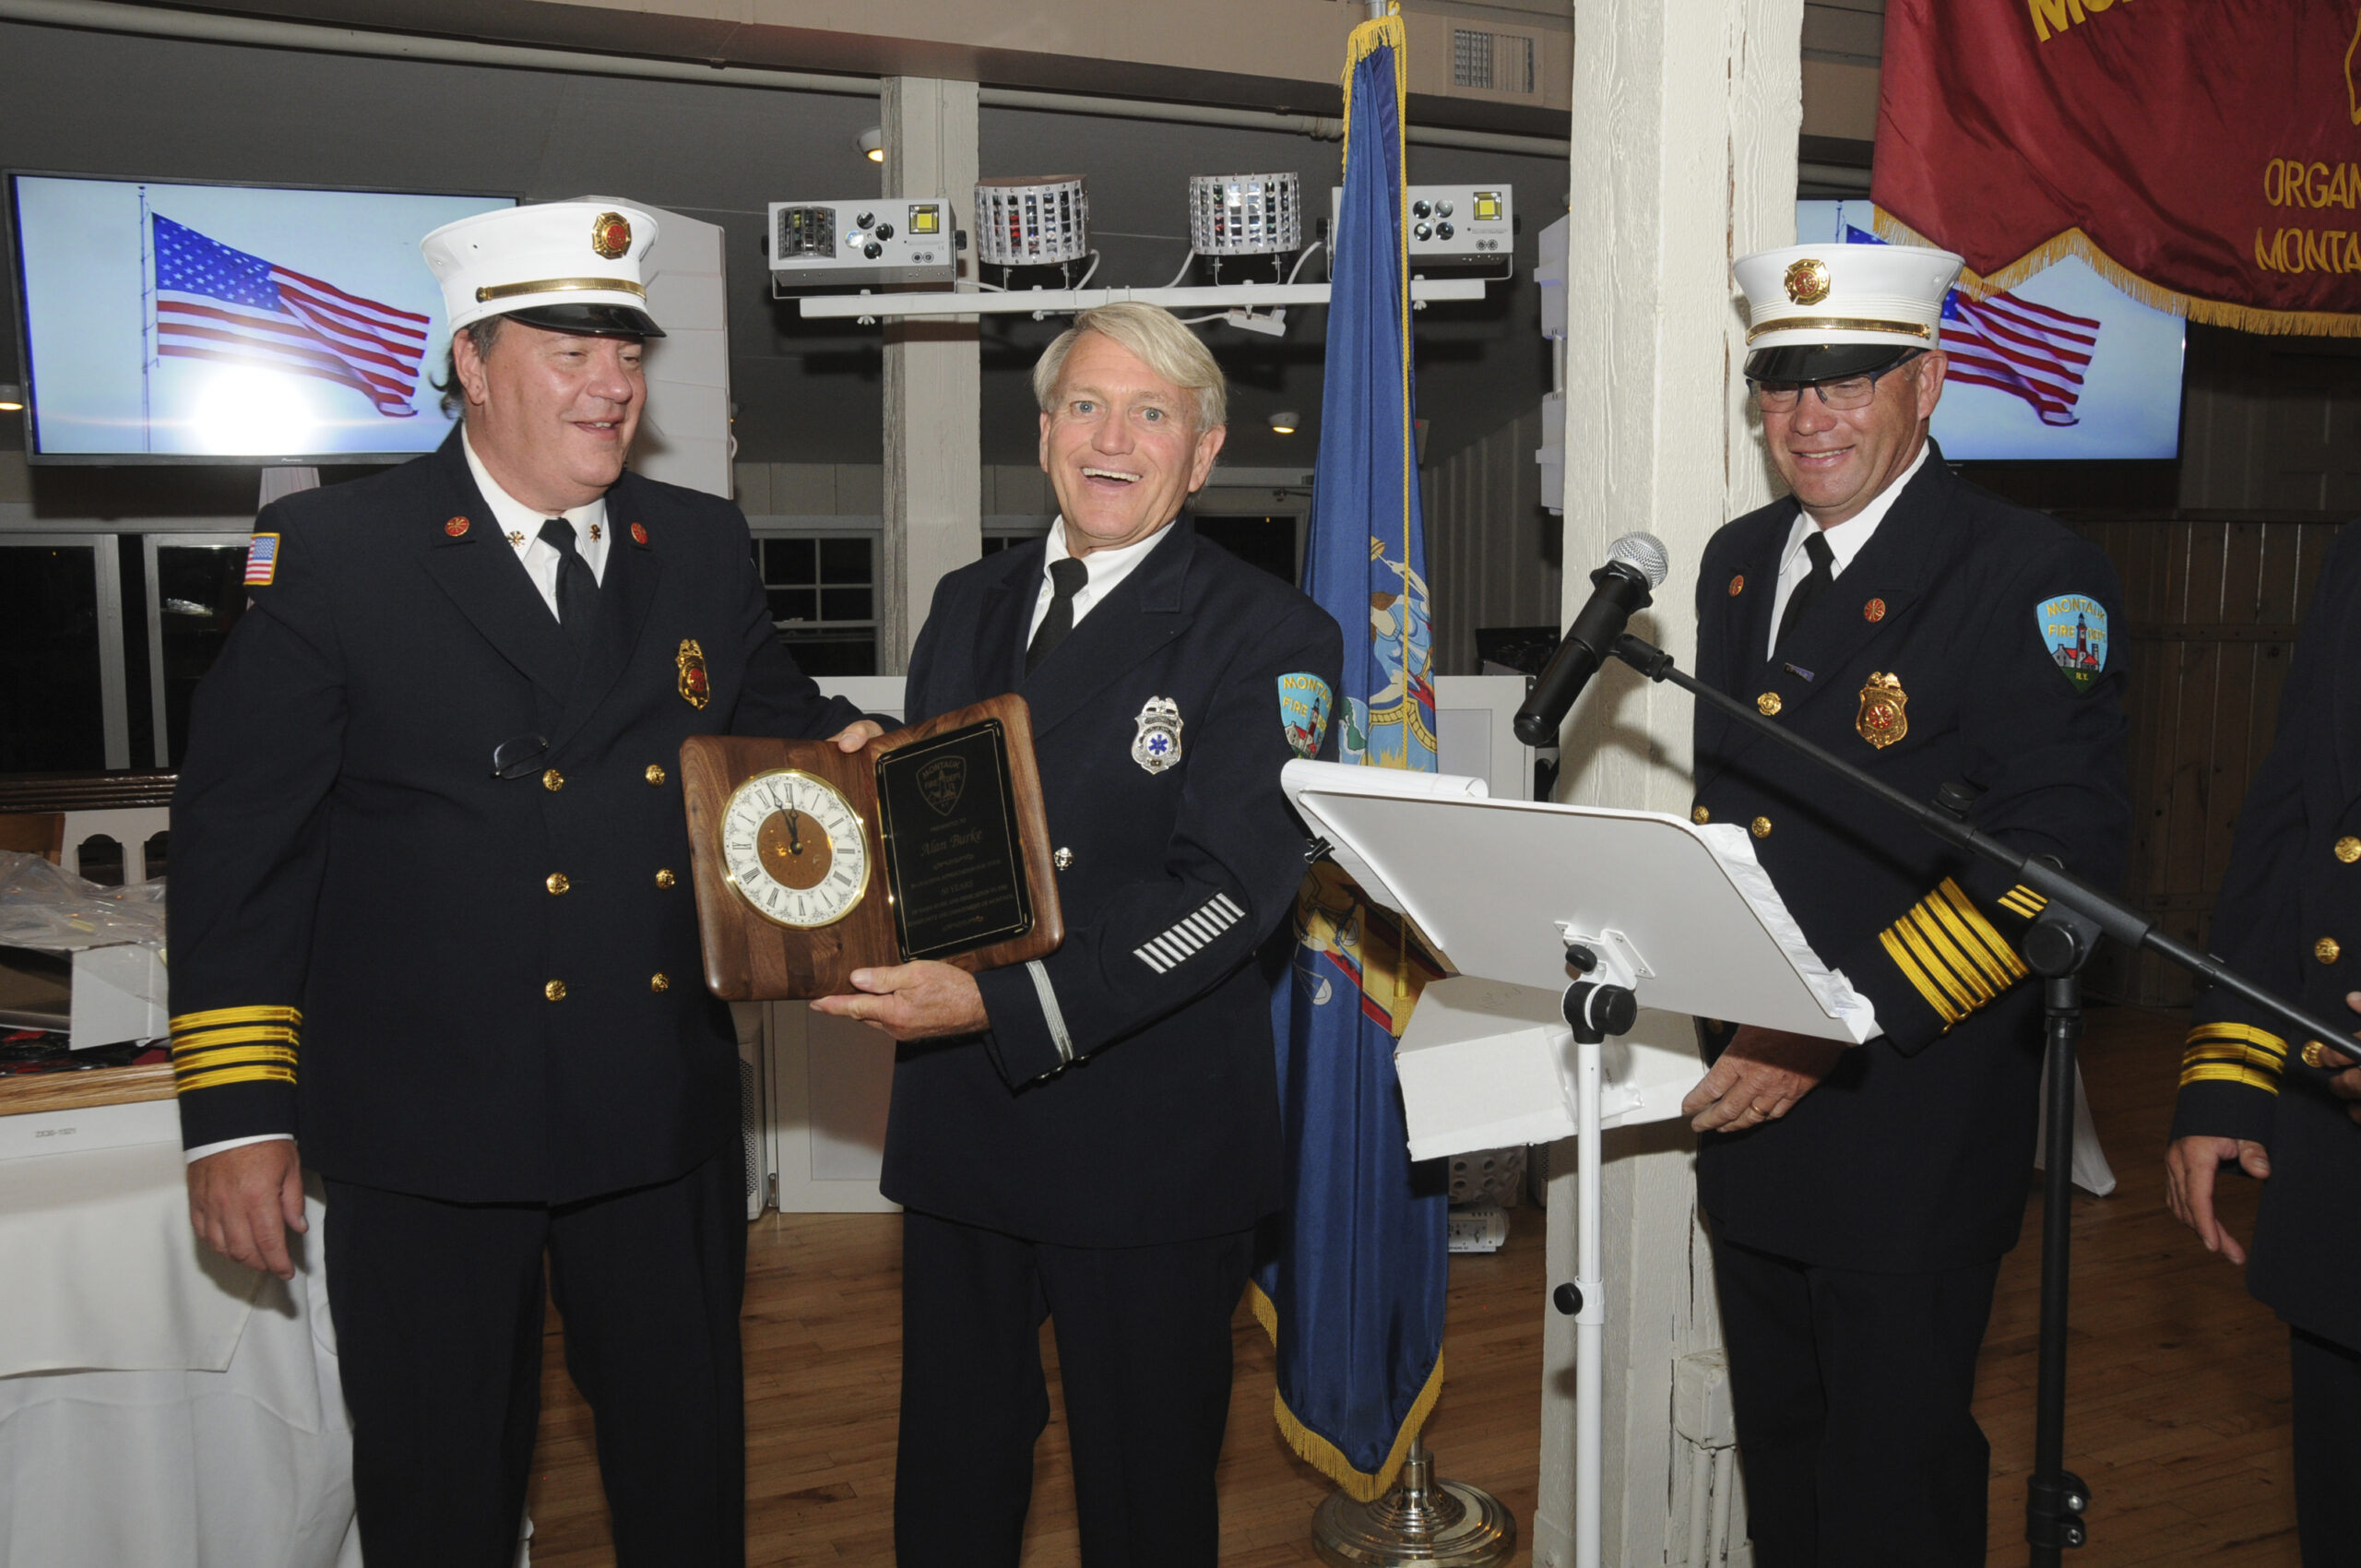 Alan Burke, center, received an award for his 50+ years of service to the Montauk Fire Department at the department's inspection dinner held on Friday evening at at Gosman's Restaurant.  RICHARD LEWIN